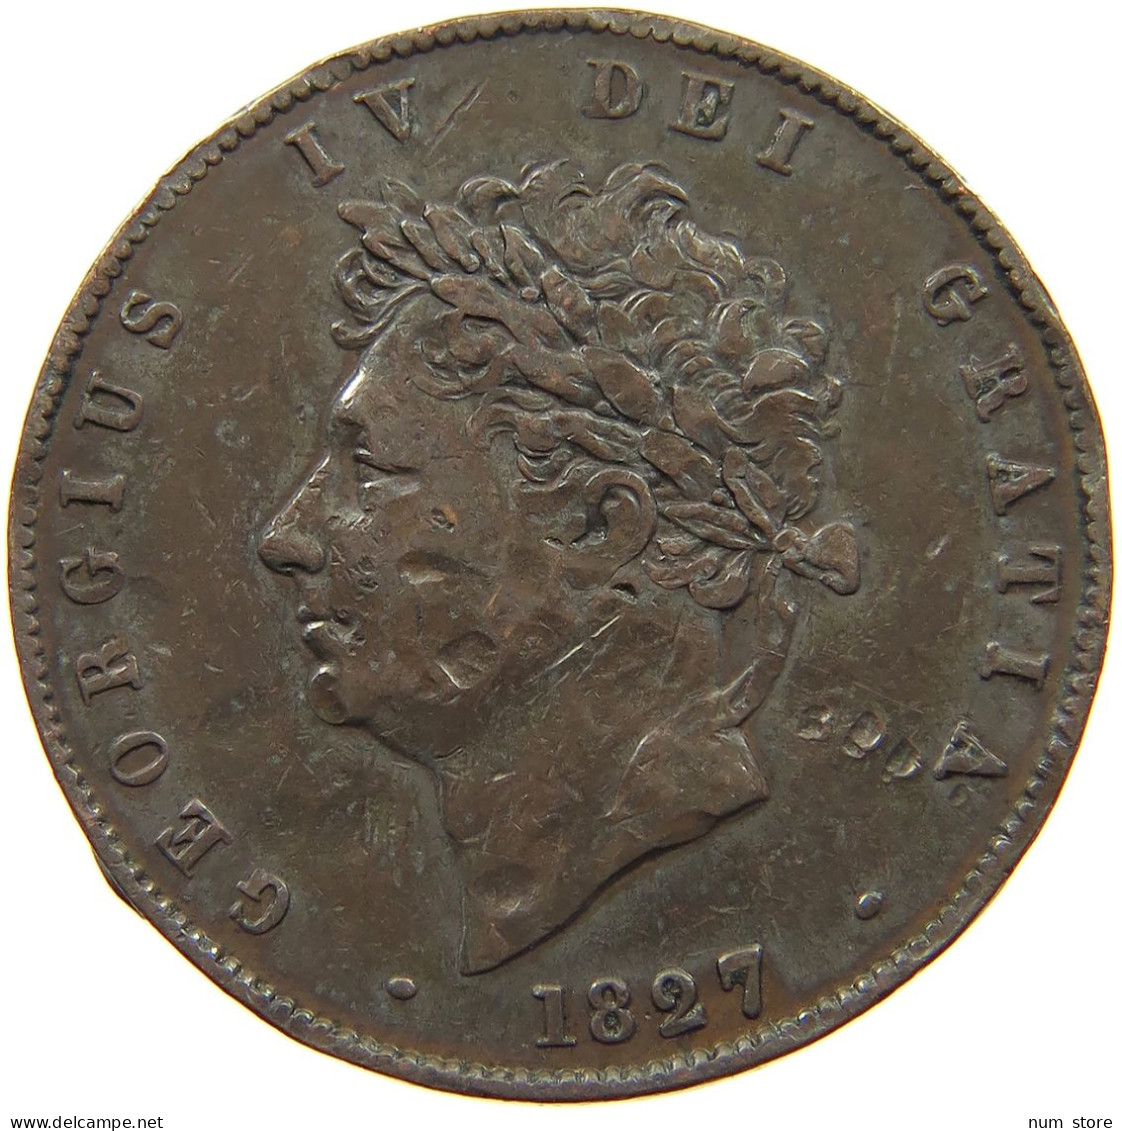 GREAT BRITAIN HALFPENNY 1827 GEORGE IV. (1820-1830) #a066 0077 - C. 1/2 Penny